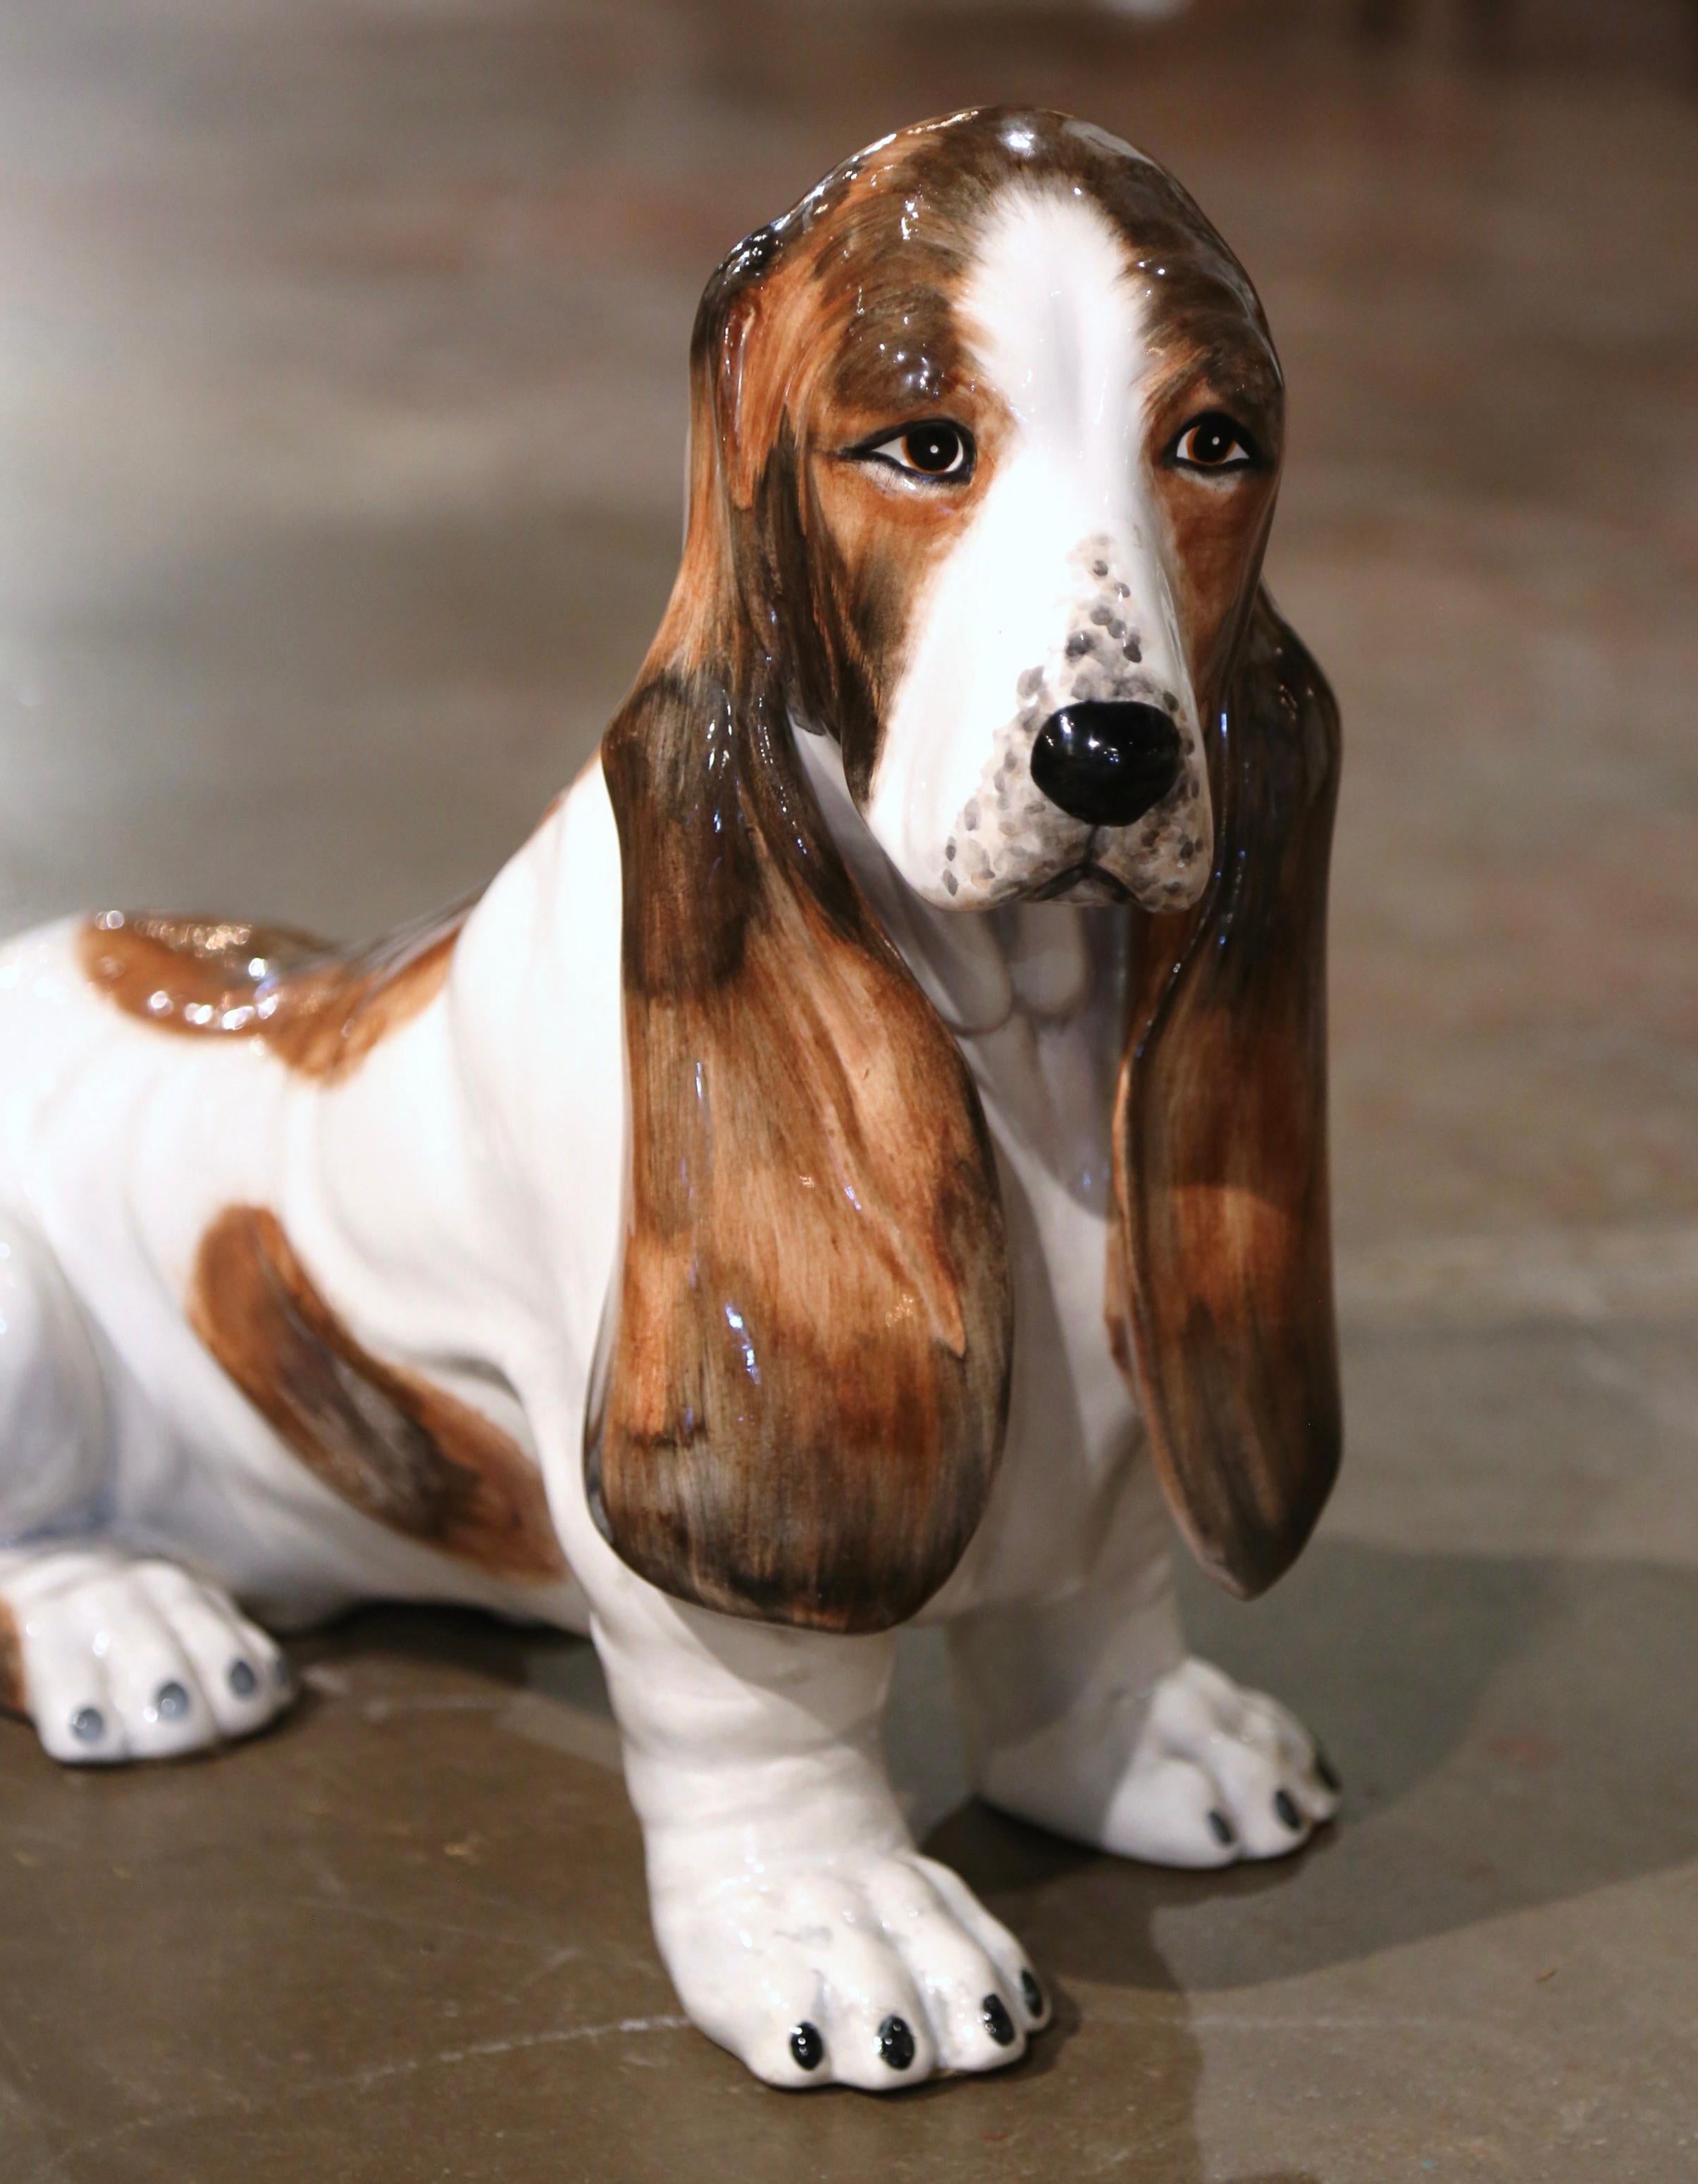 Dog lovers will appreciate this realistic vintage hound dog. Crafted in Italy, circa 2000, this charming terracotta statue is life-size, and depicts a large basset hound with long droopy ears sitting at attention. Boasting lovely russet, brown and